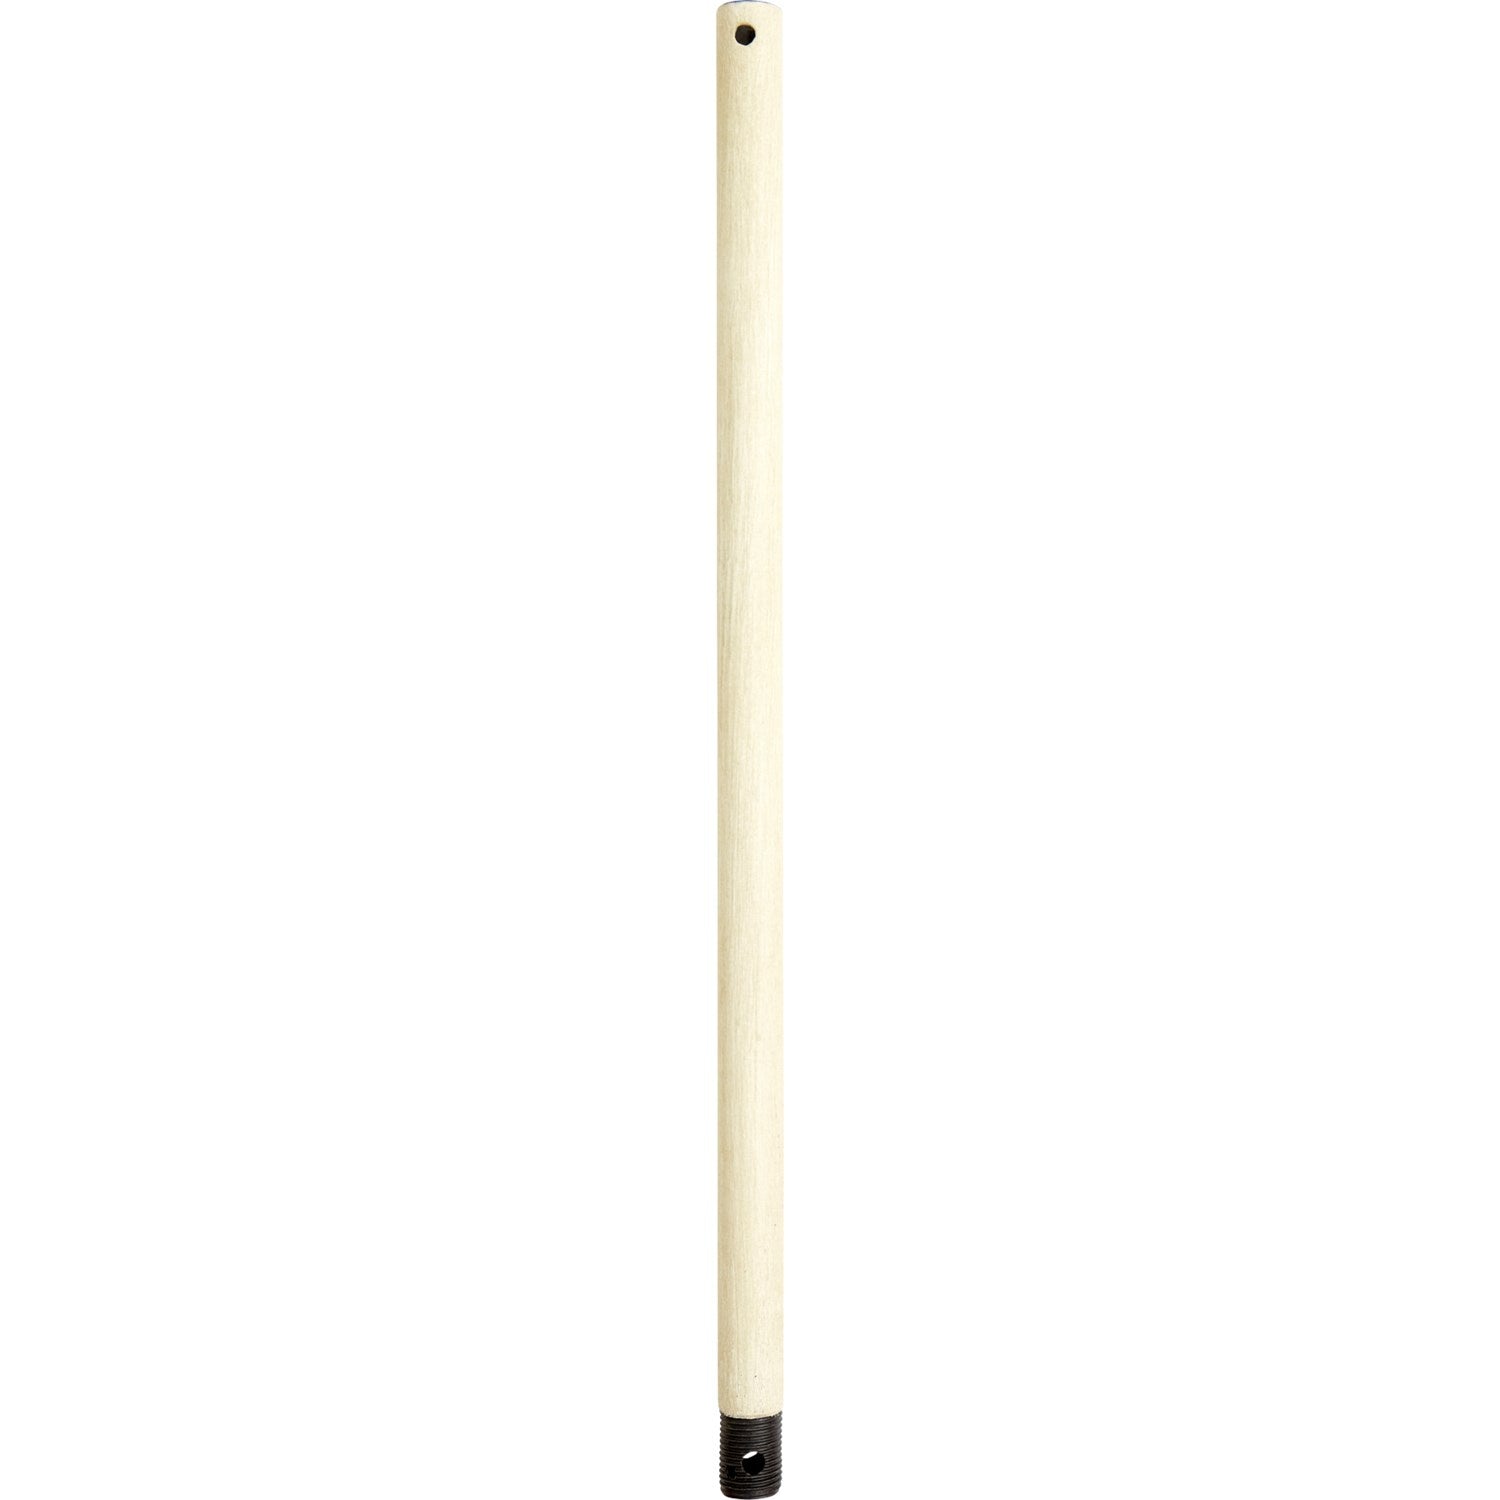 Quorum - 6-1870 - Downrod - 18 in. Downrods - Persian White